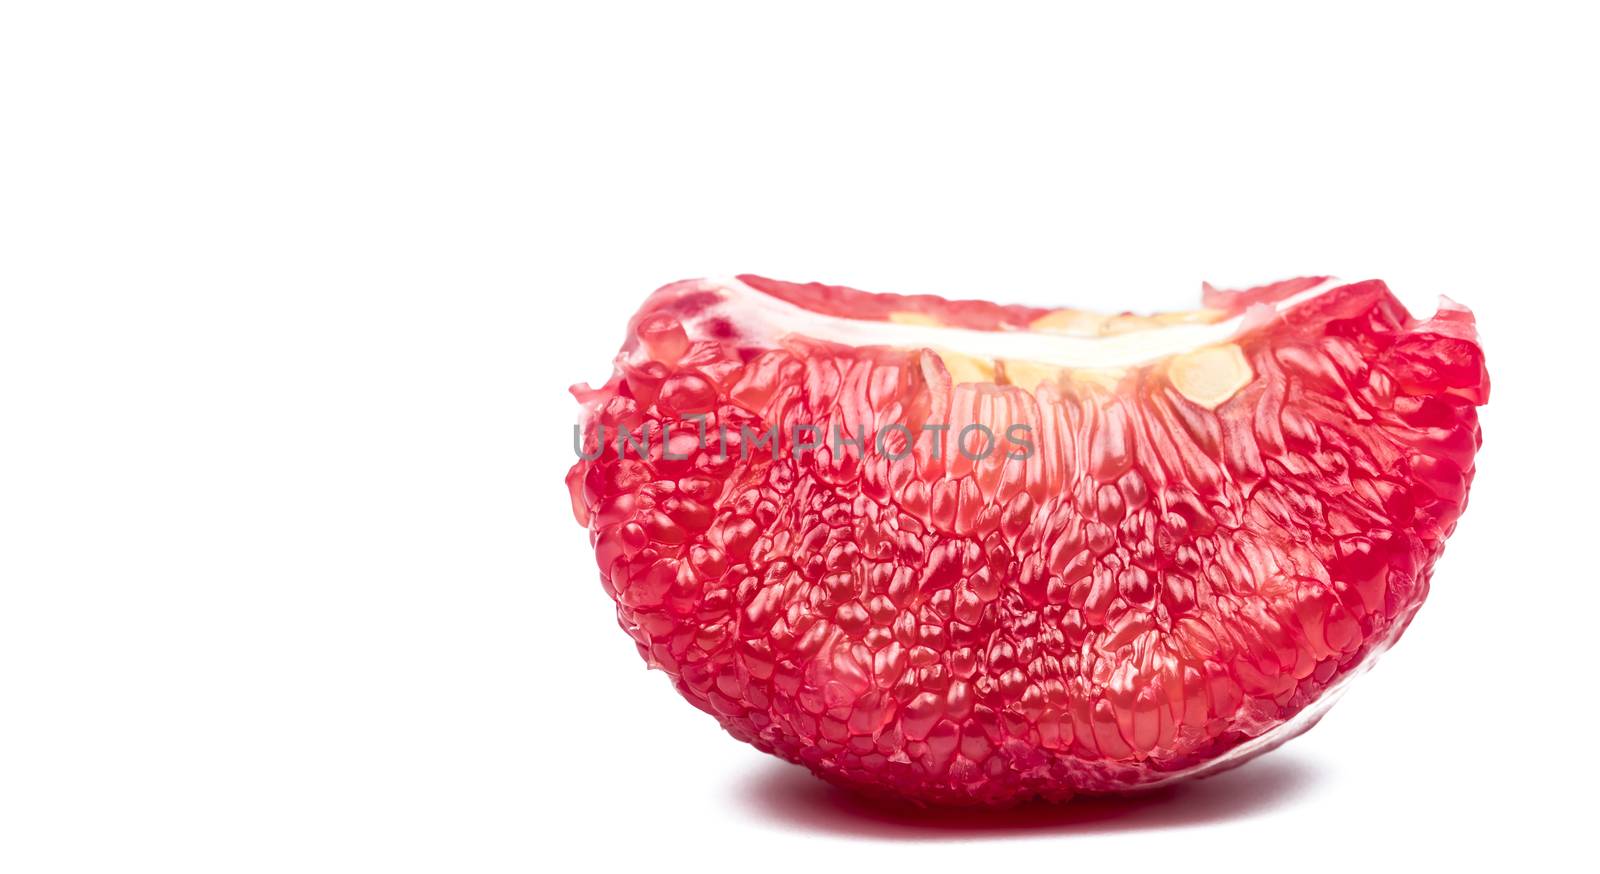 Red pomelo pulp with seeds isolated on white background with clipping path. Thailand Siam ruby pomelo fruit. Natural source of vitamin C (antioxidants) and potassium. Healthy food for slow down aging